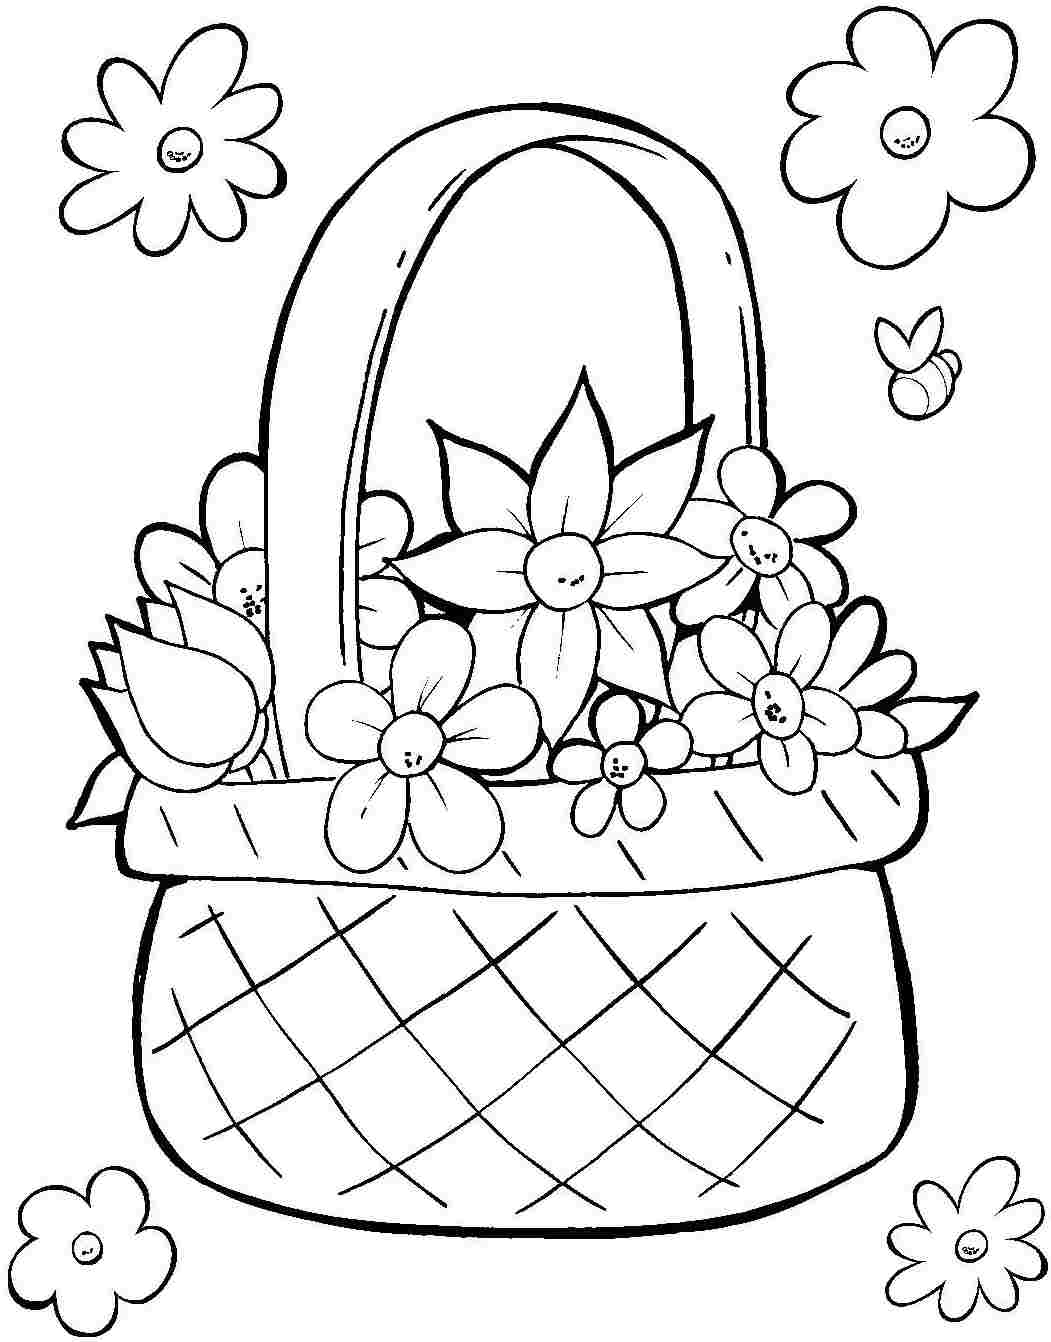 Easter Basket Printable Coloring Pages at GetColorings.com ...